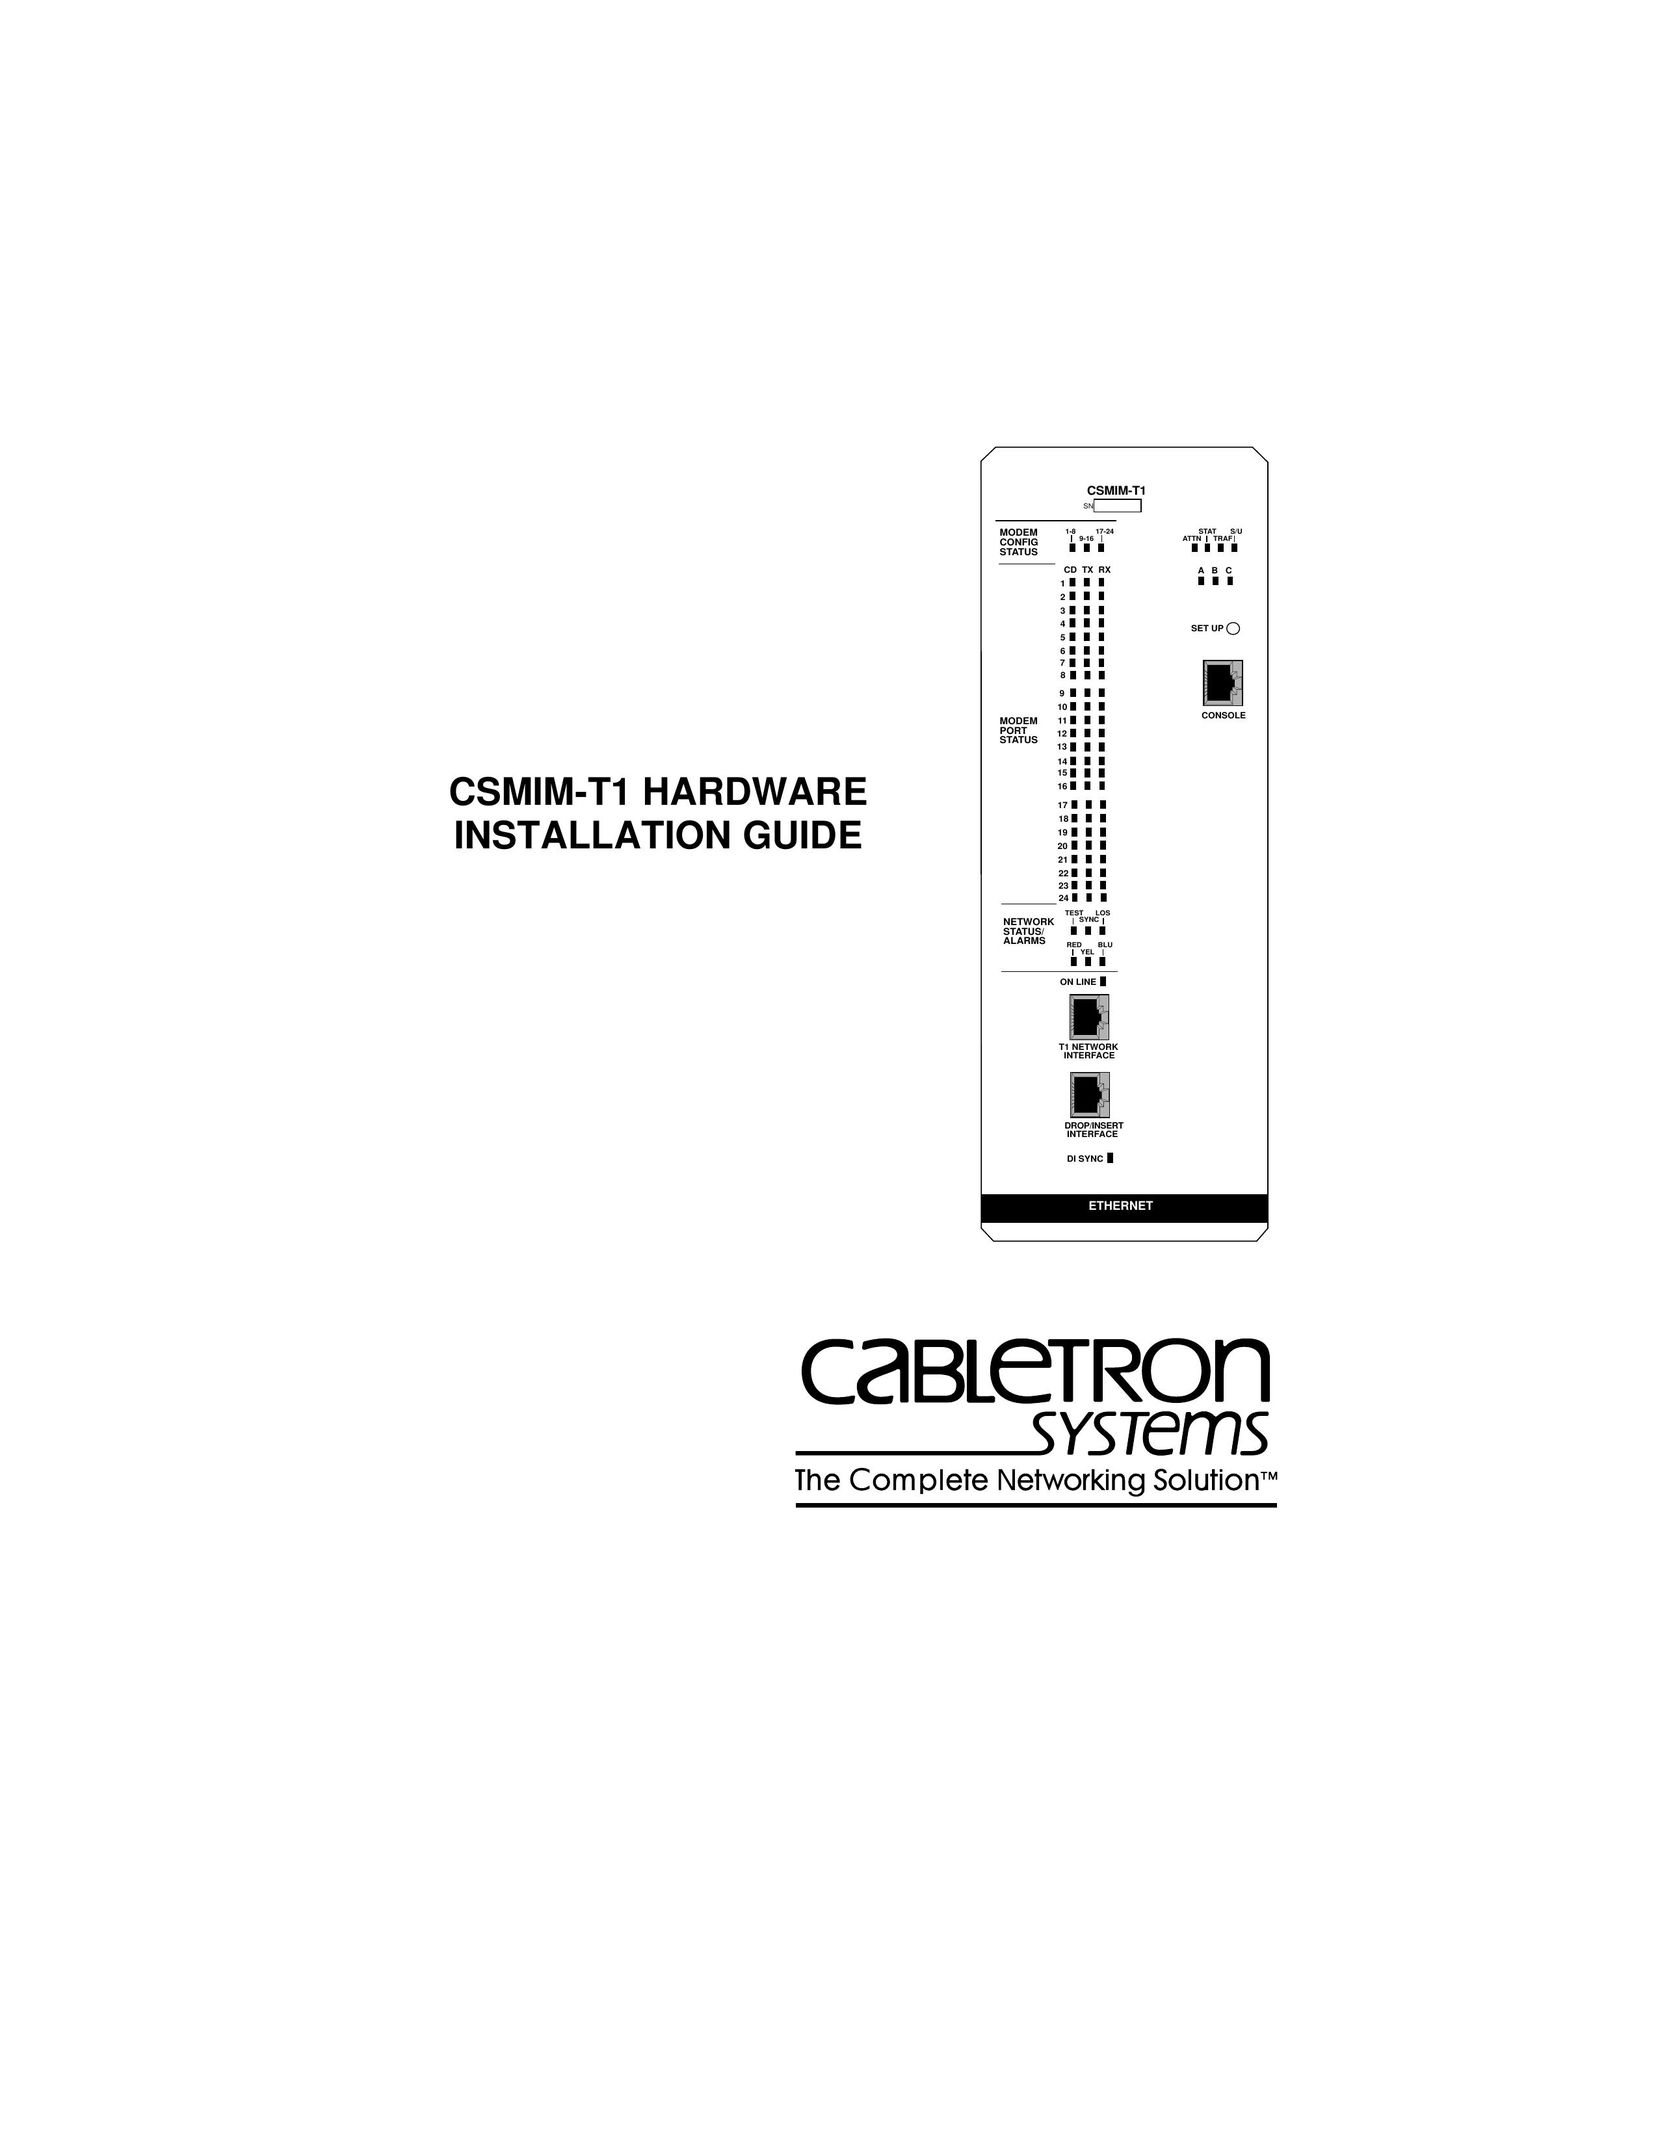 Cabletron Systems CSMIM-T1 Network Hardware User Manual